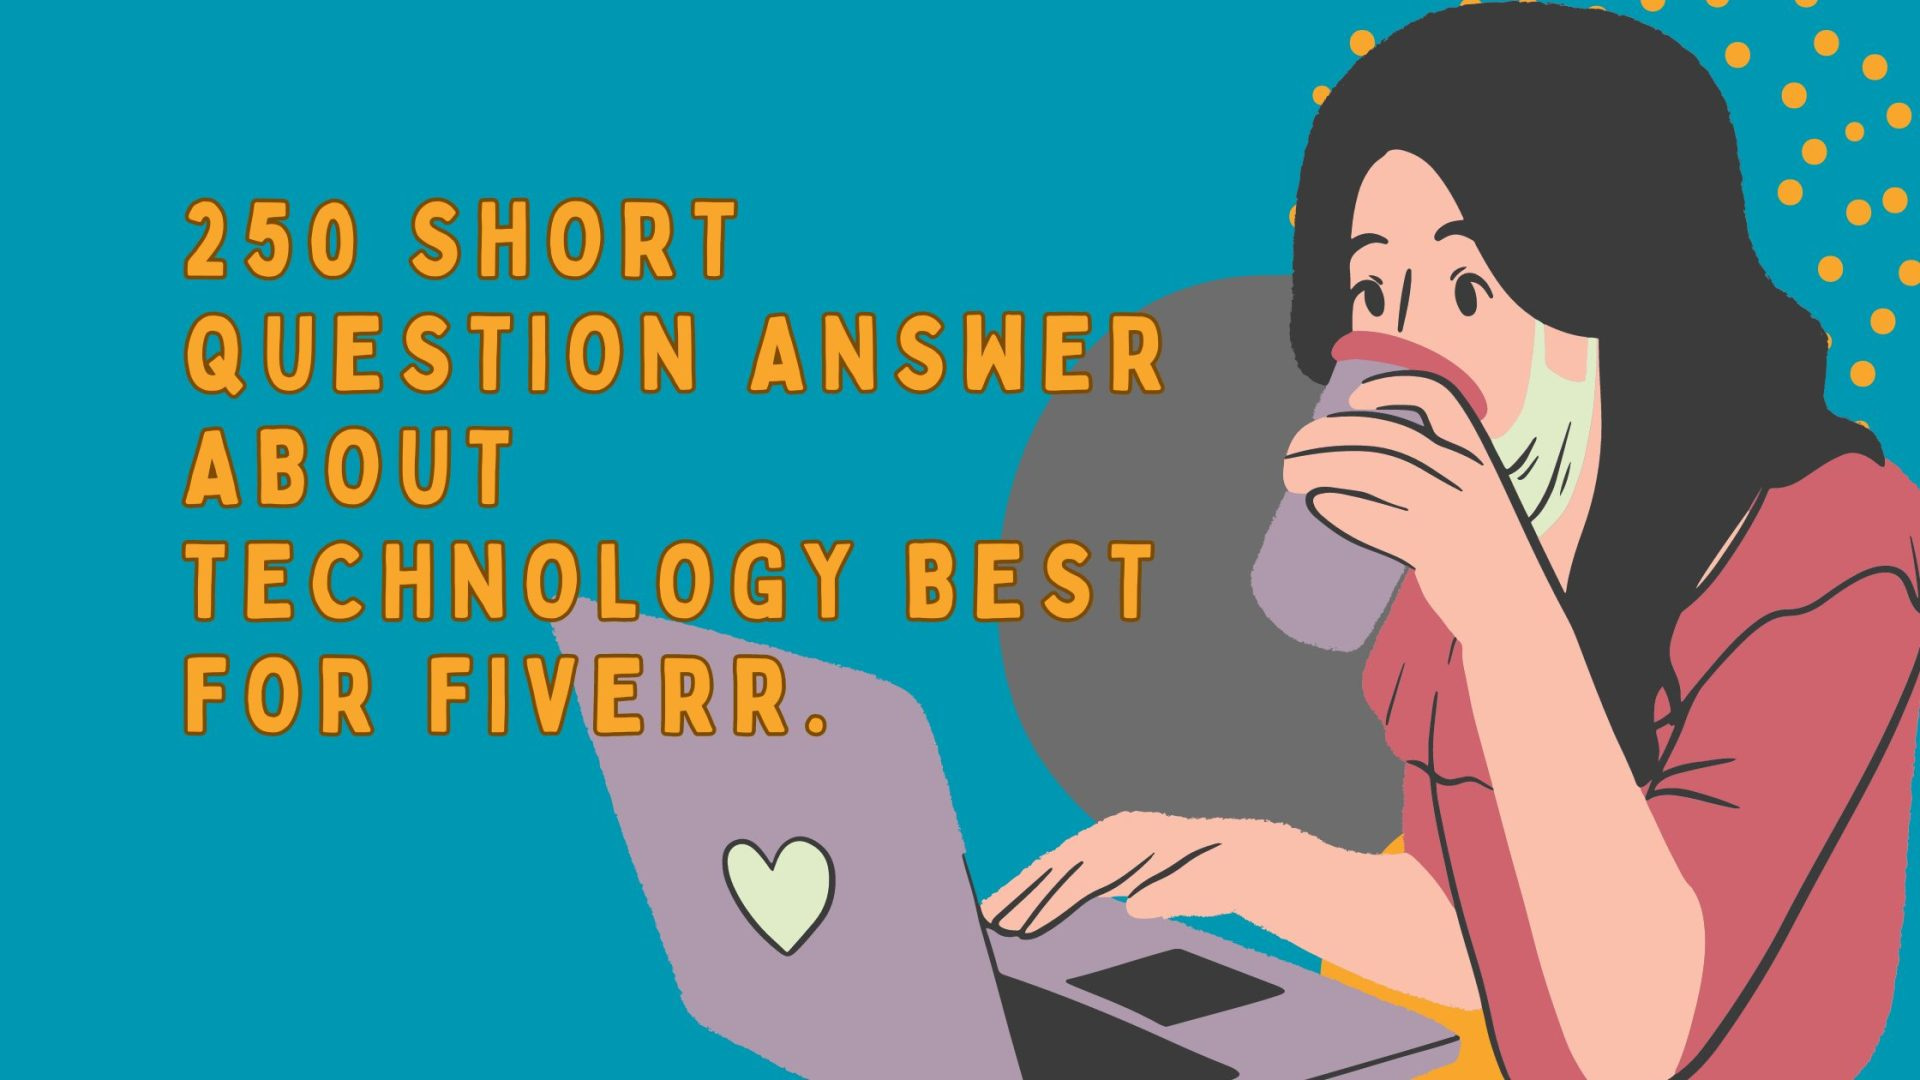 250 short question answer about technology best for fiverr.